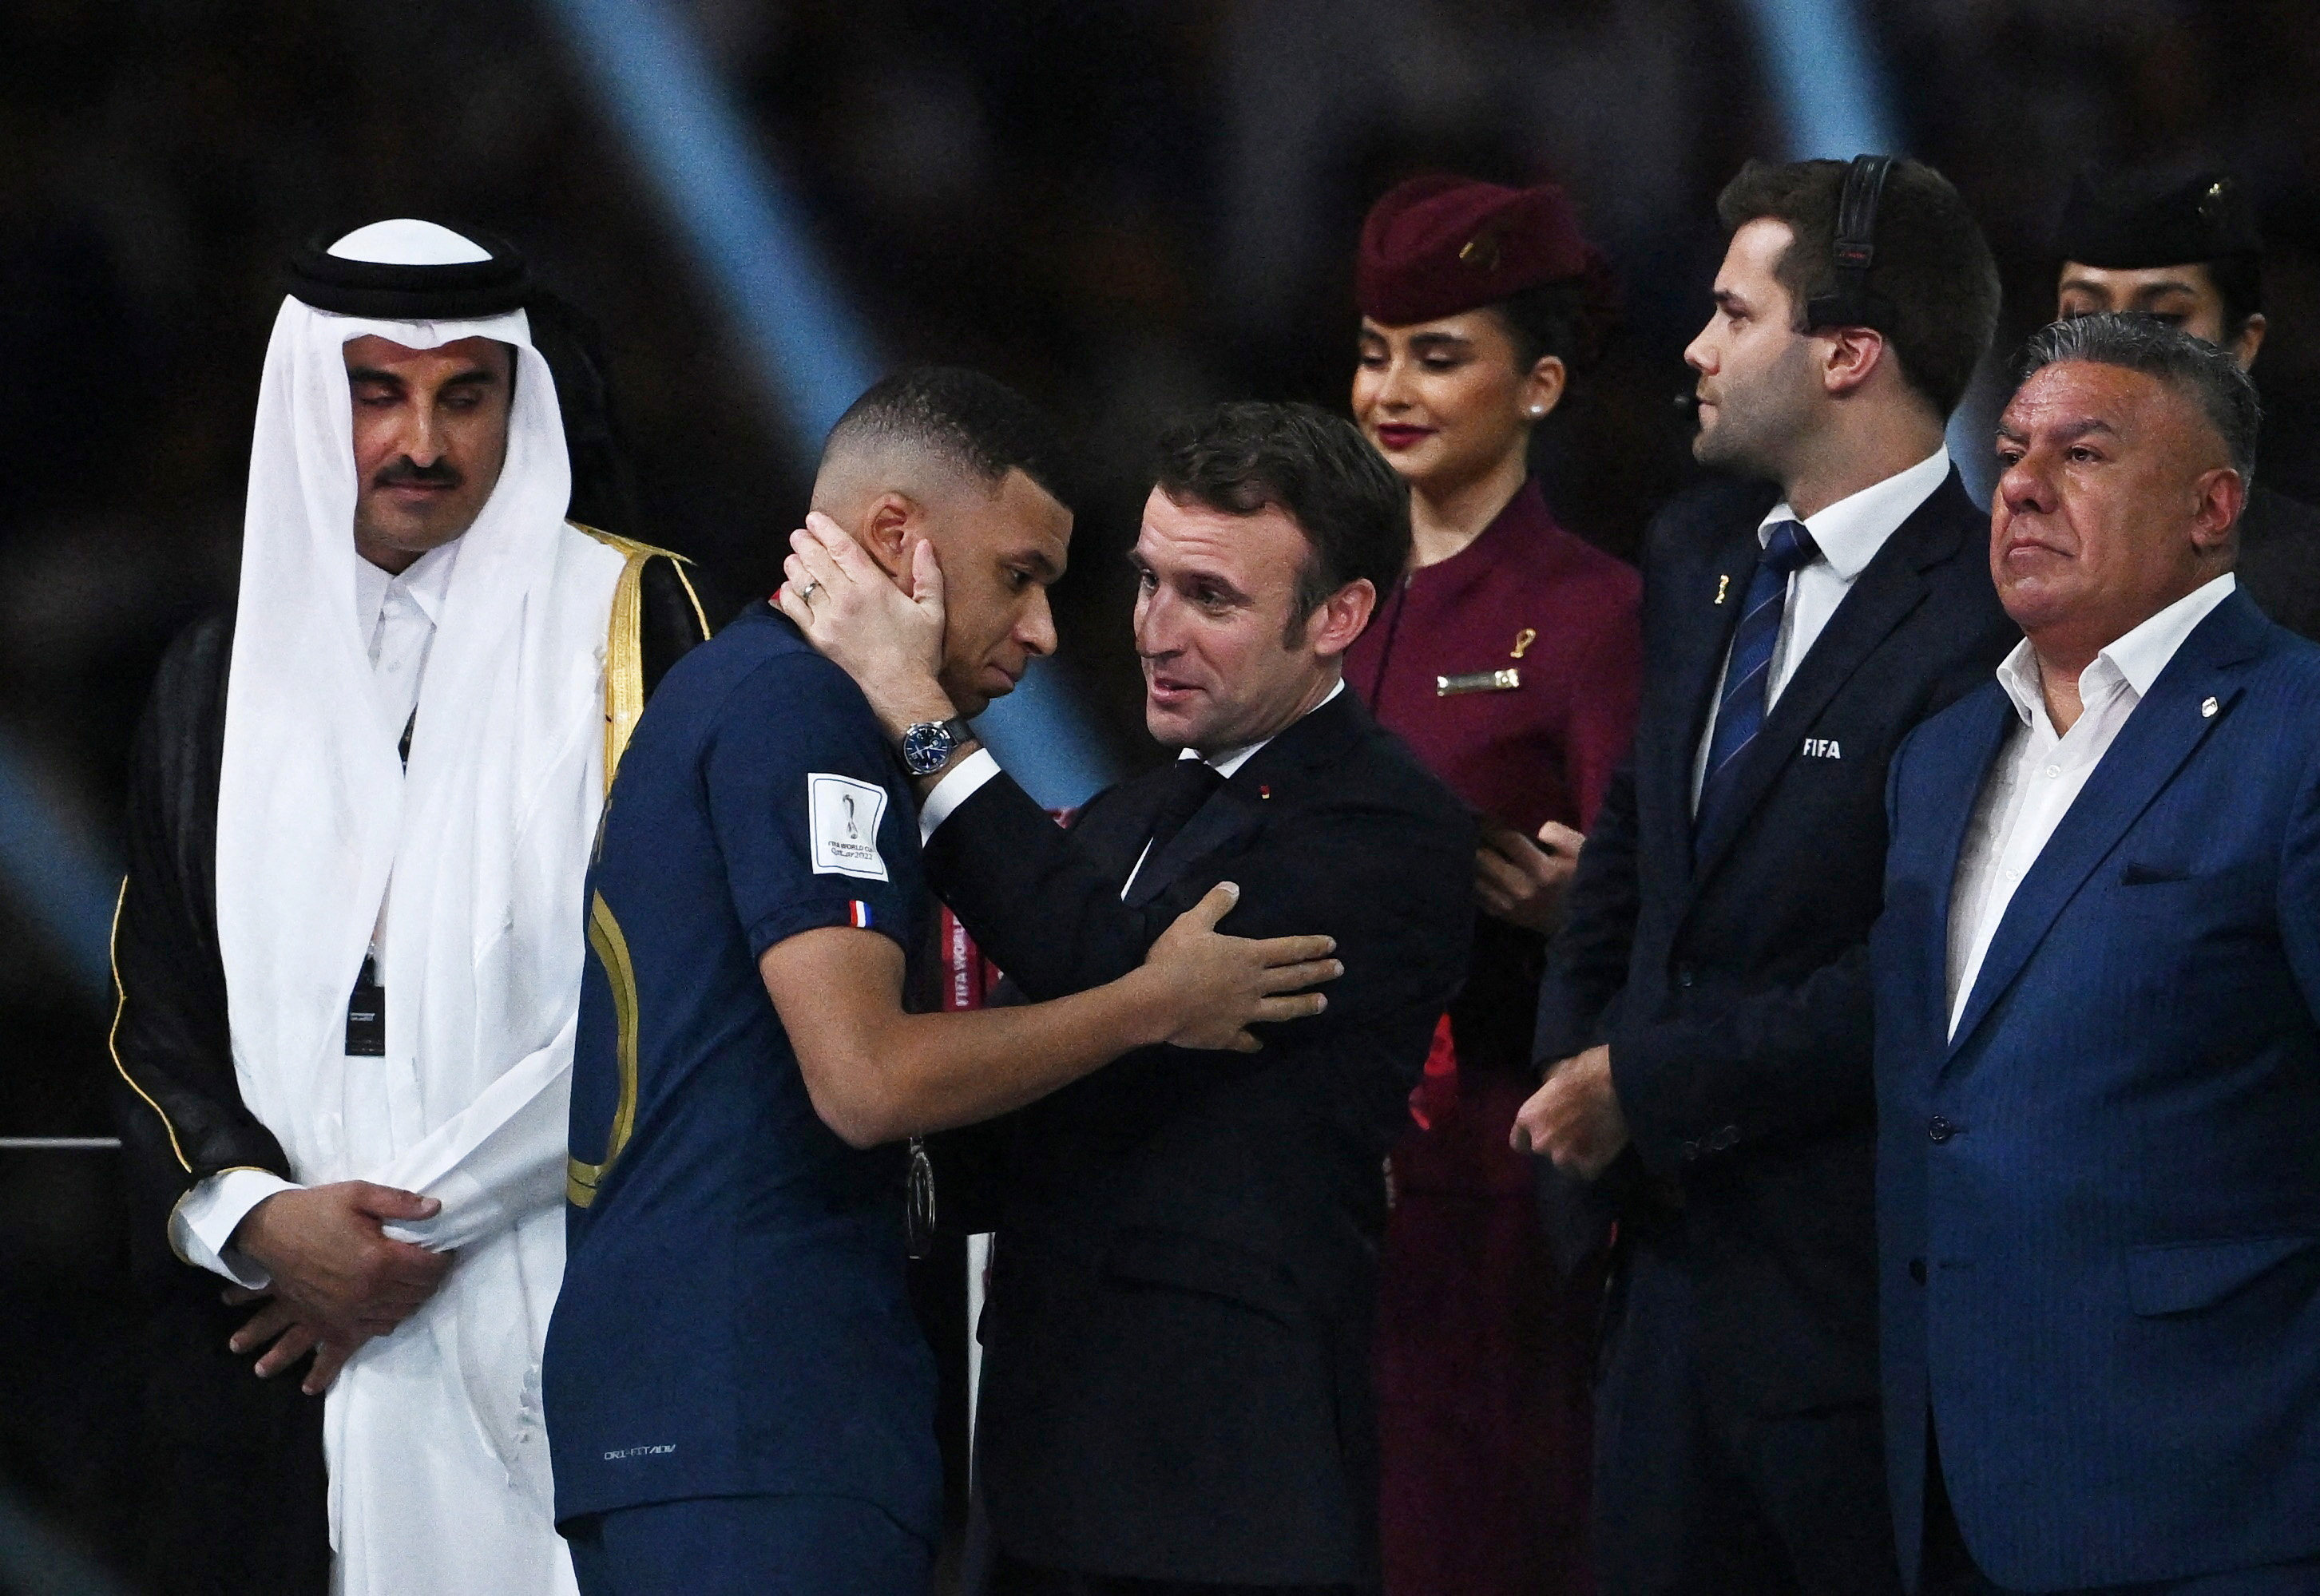 French President Emmanuel Macron with France’s Kylian Mbappe as President of the Argentine Football Association Claudio Fabian Tapia and the Emir of Qatar Sheikh Tamim bin Hamad Al Thani look on during the trophy ceremony. Photo: Reuters